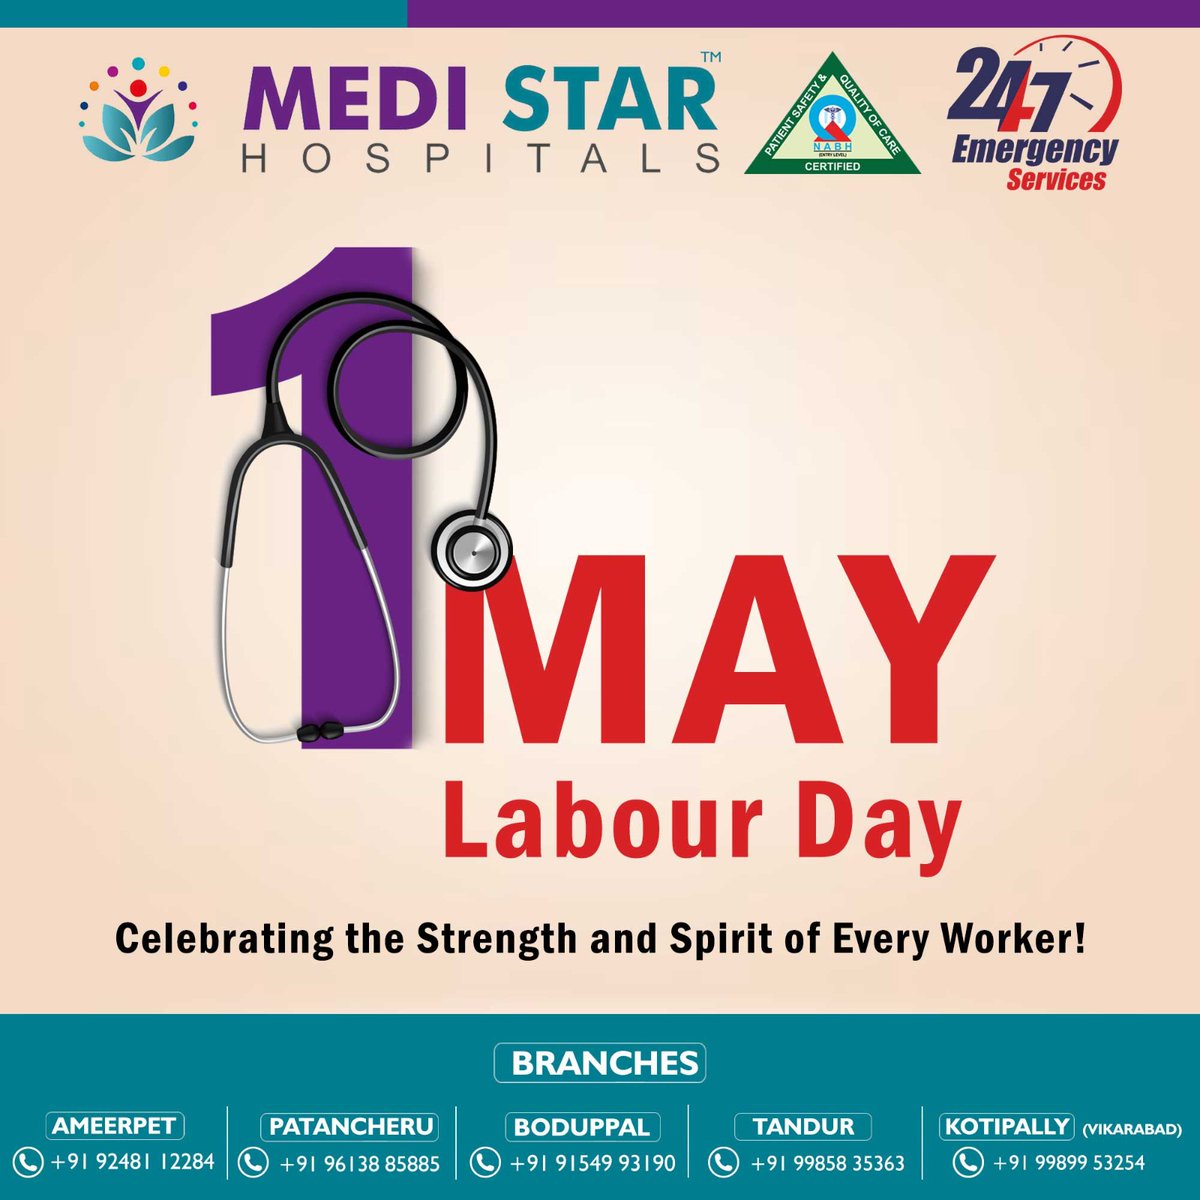 Here's to those who work tirelessly to make a difference. Happy Labor Day!

#LabourDay #HappyLabourDay #WorkersRights #LabourMovement #MayDay #Solidarity #FairWages #Union #WorkersDay #LabourRights #LabourUnion #Medistarhospitals1 #Medistarhospitals